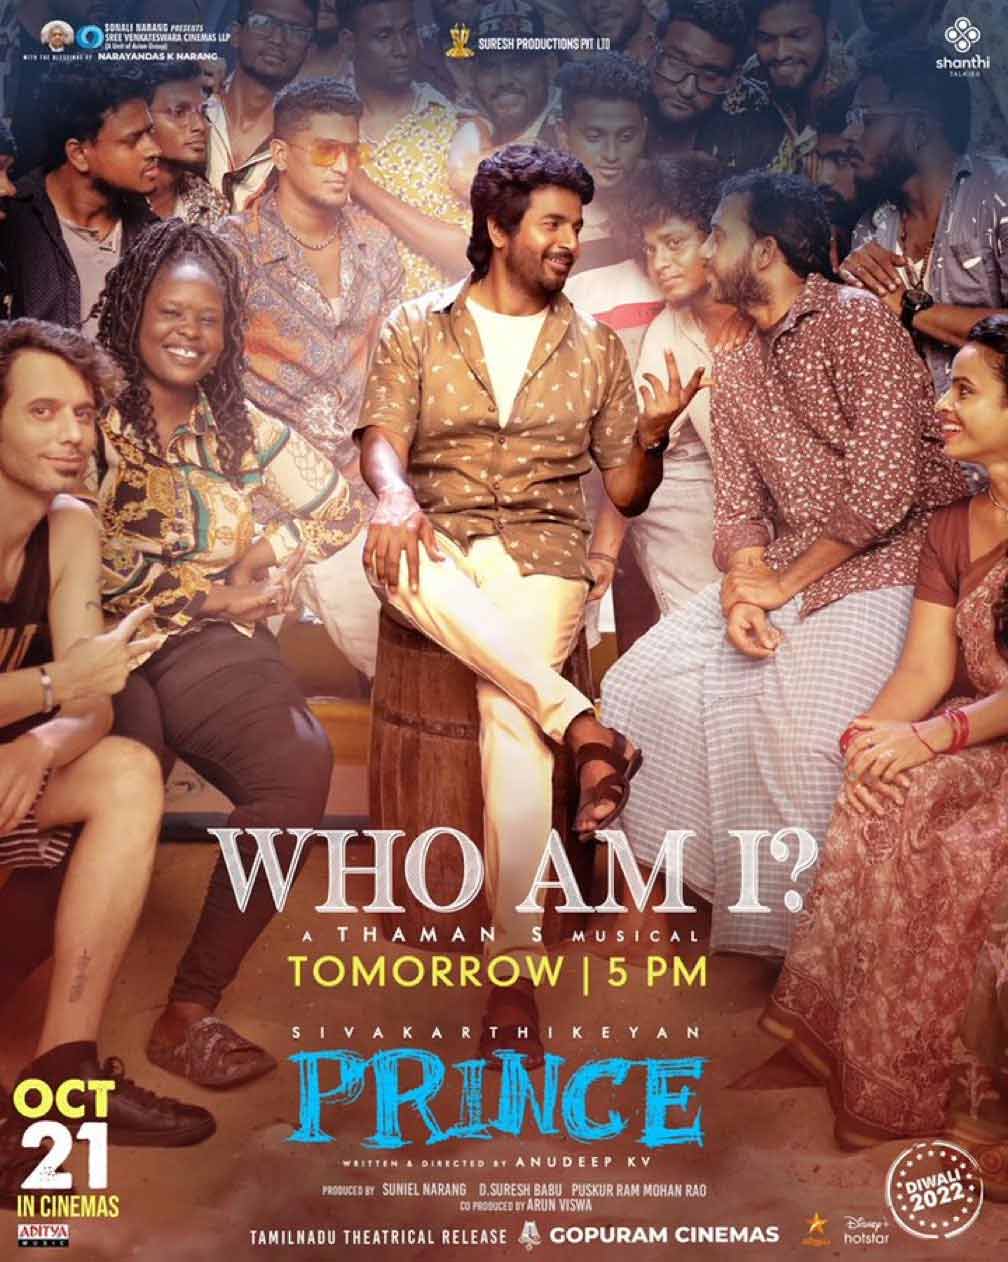 Who am i.. Song Coming From 'Prince' Movie